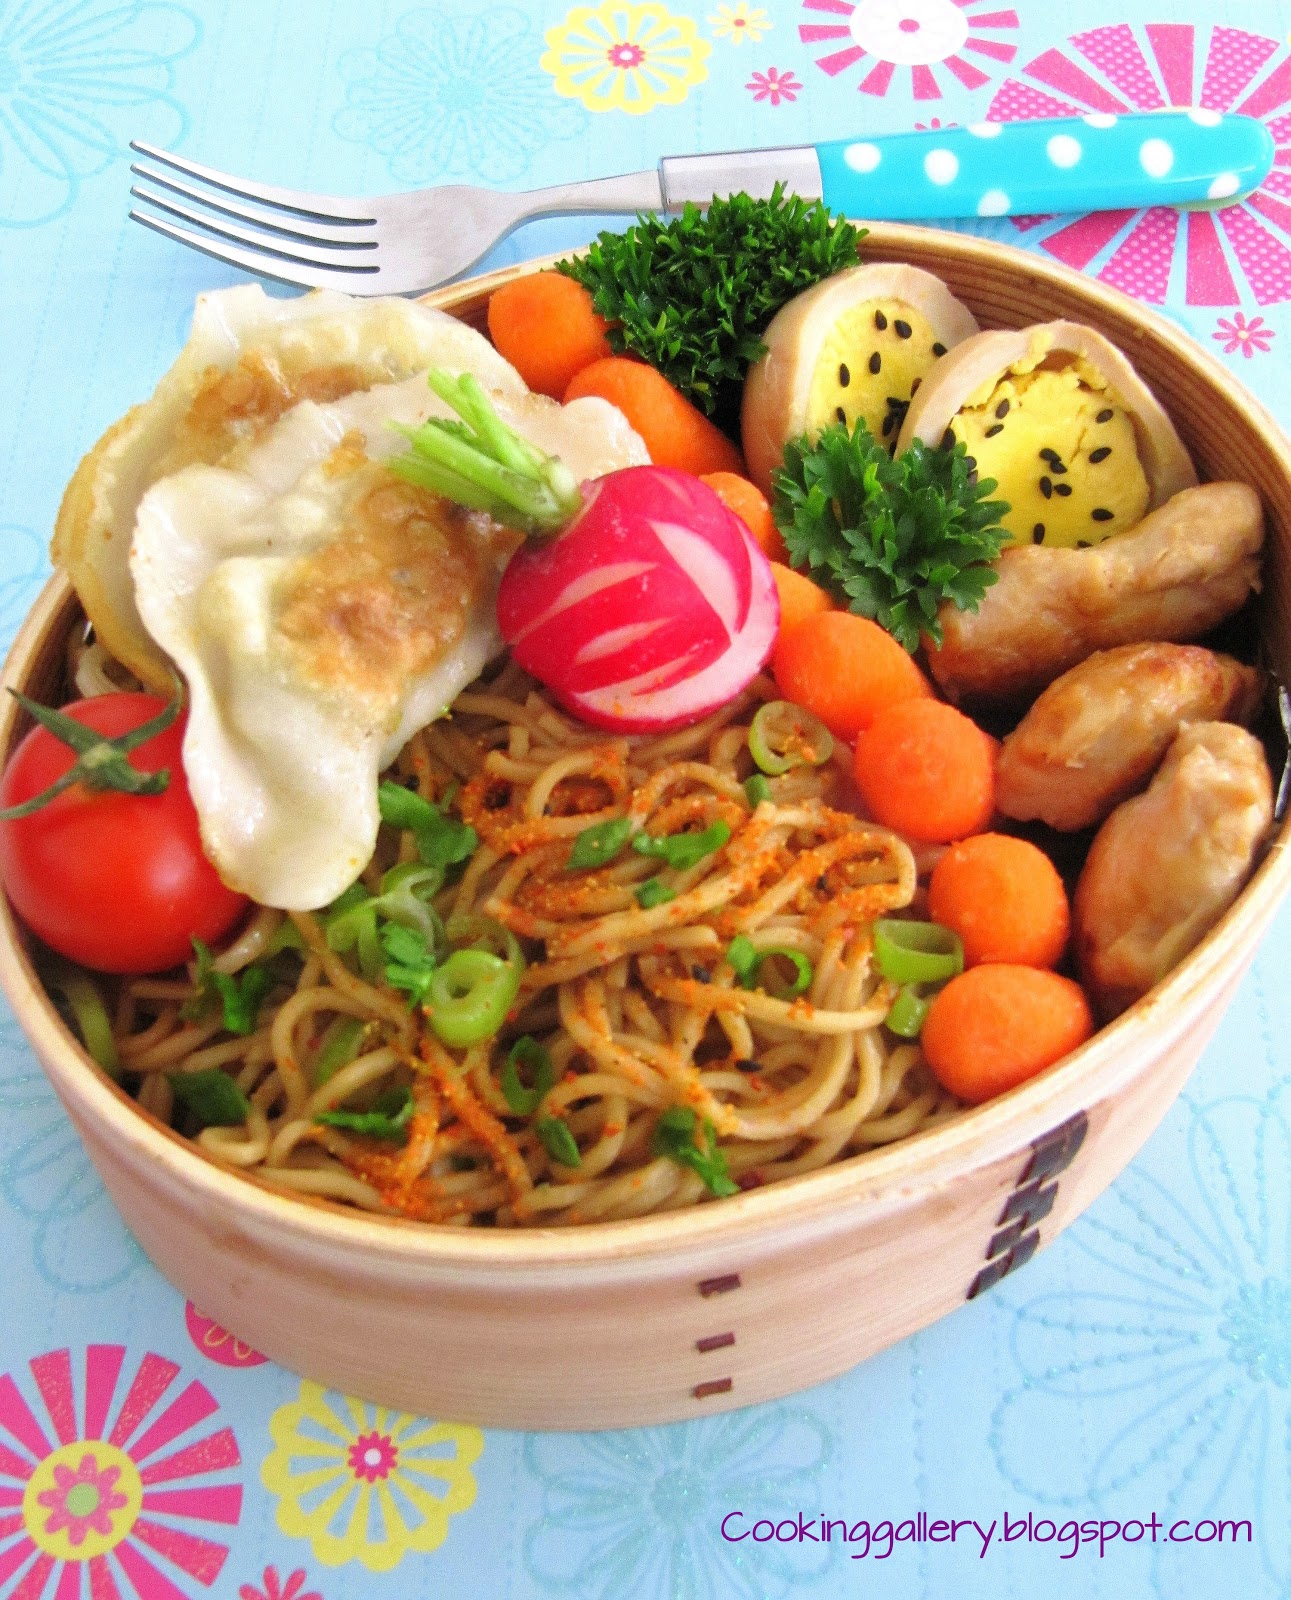 Download this Fried Noodles Bento picture